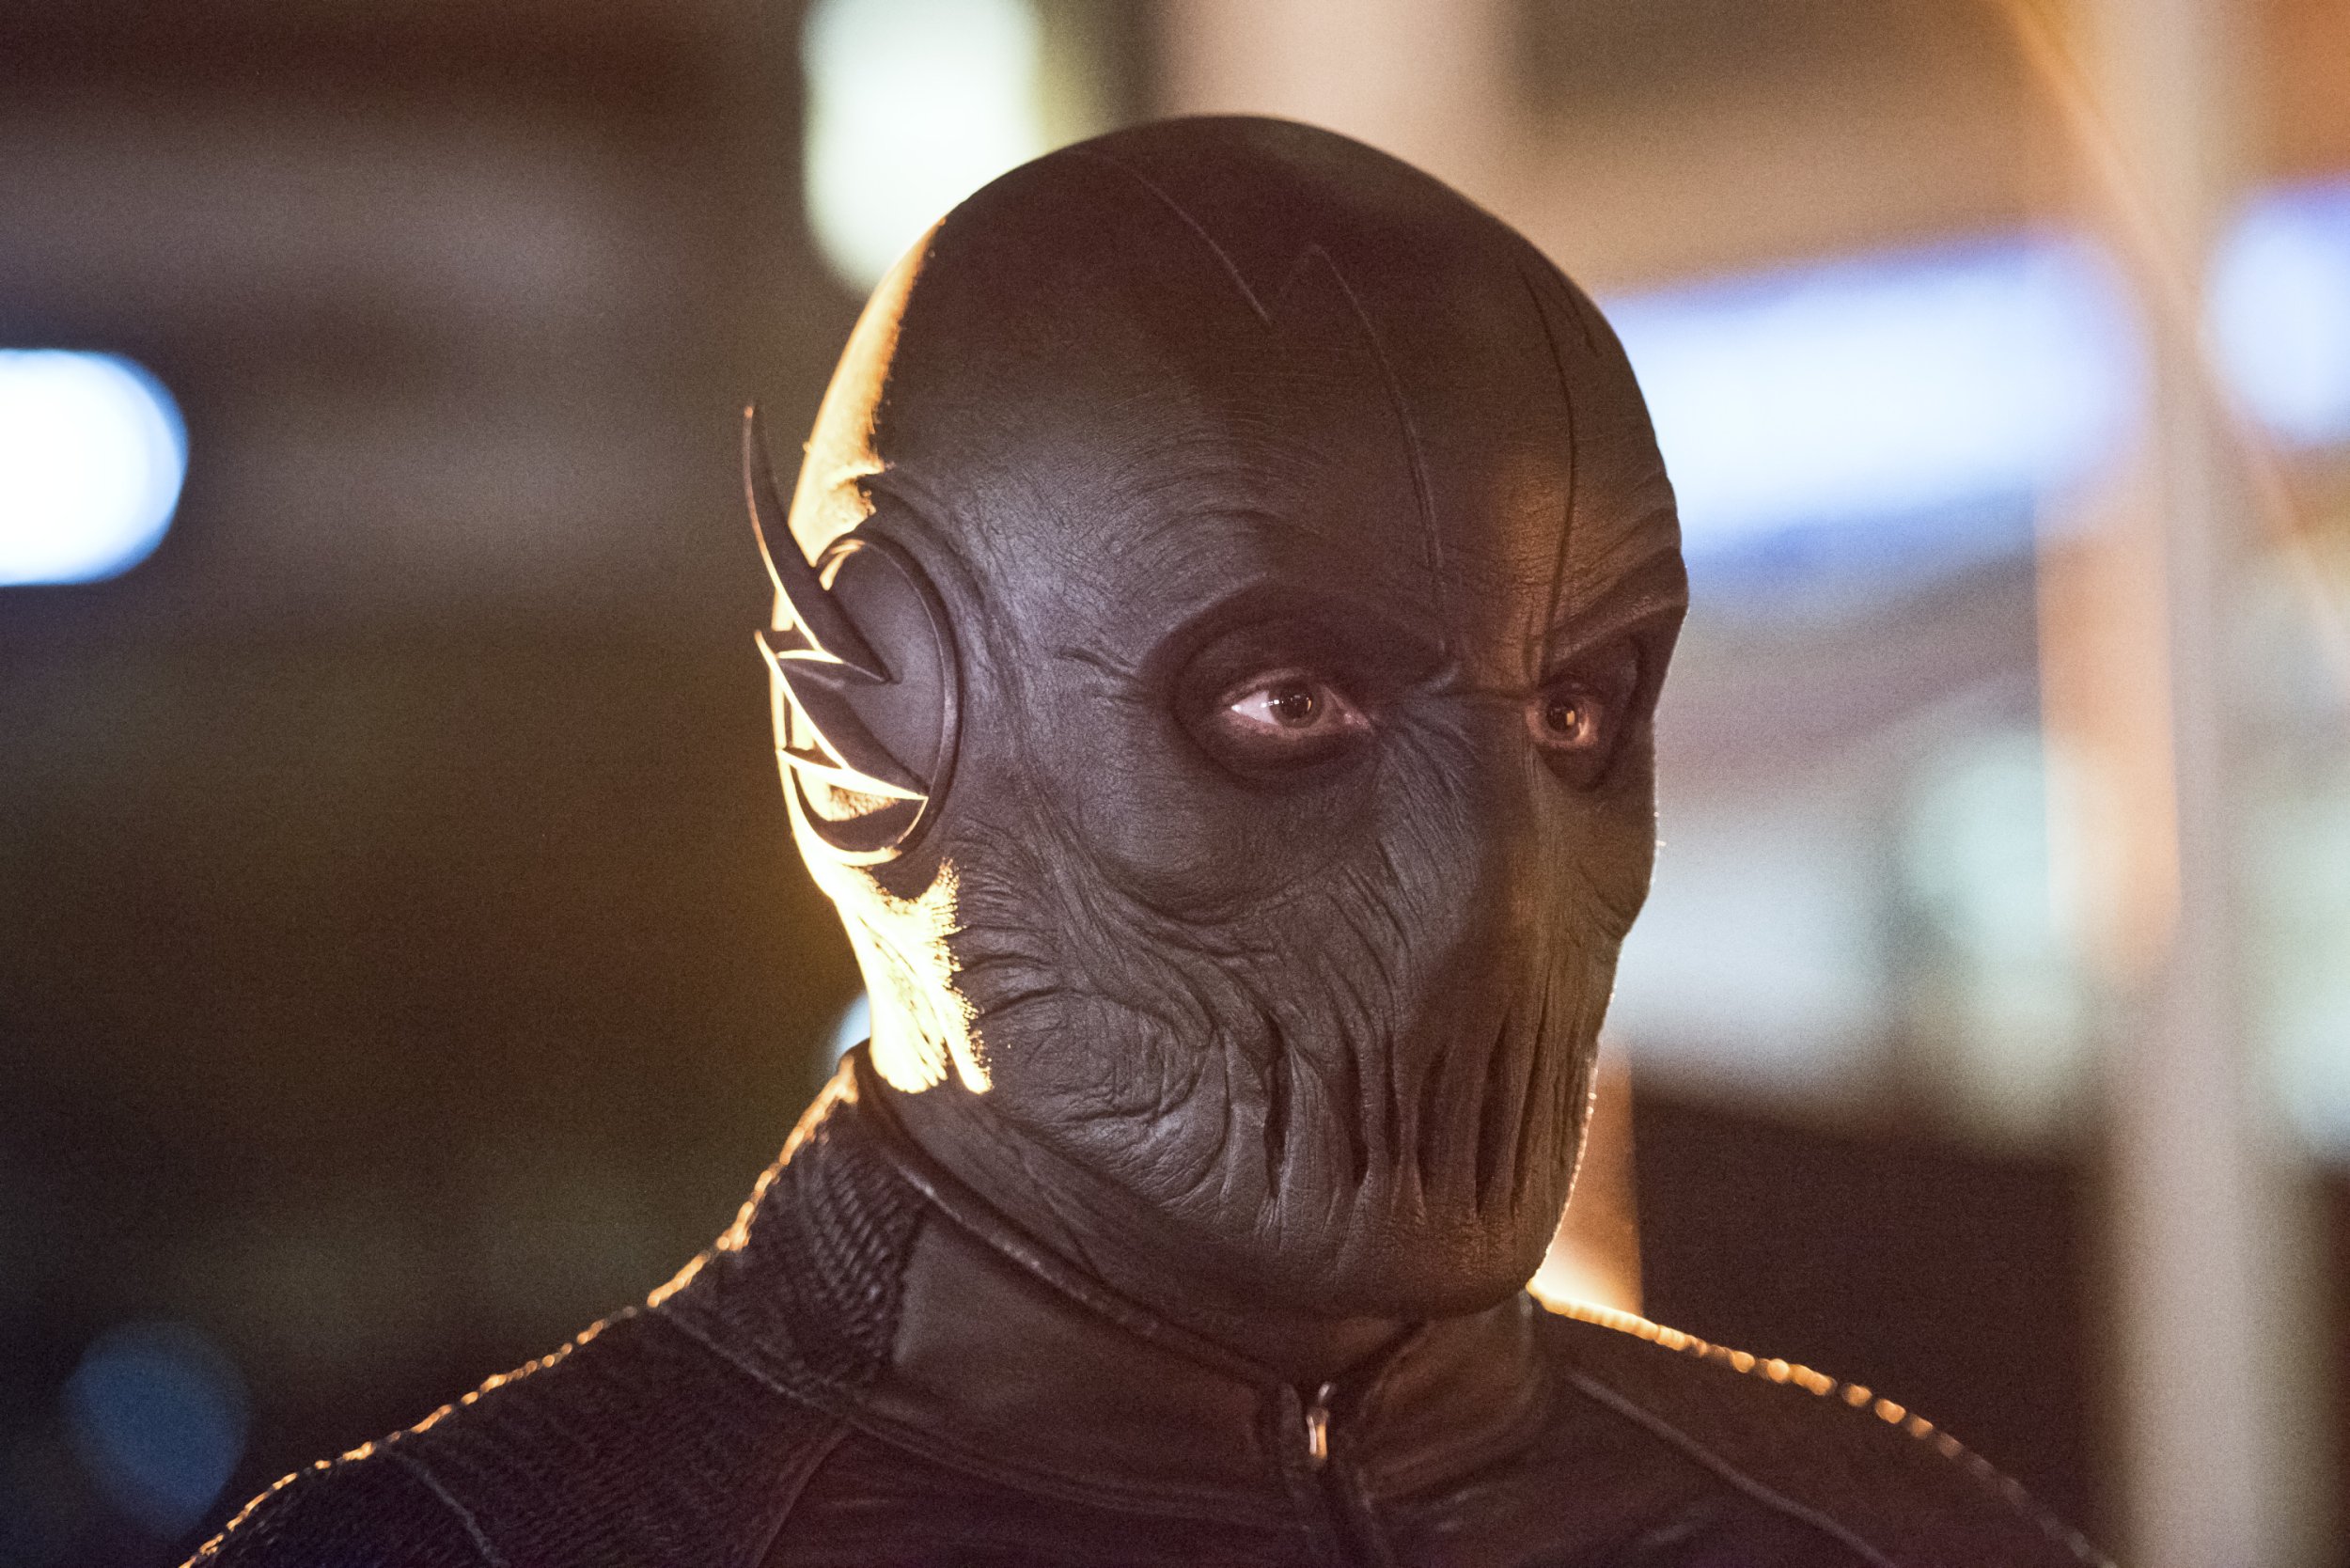 Tony Todd Cast as Zoom on The Flash